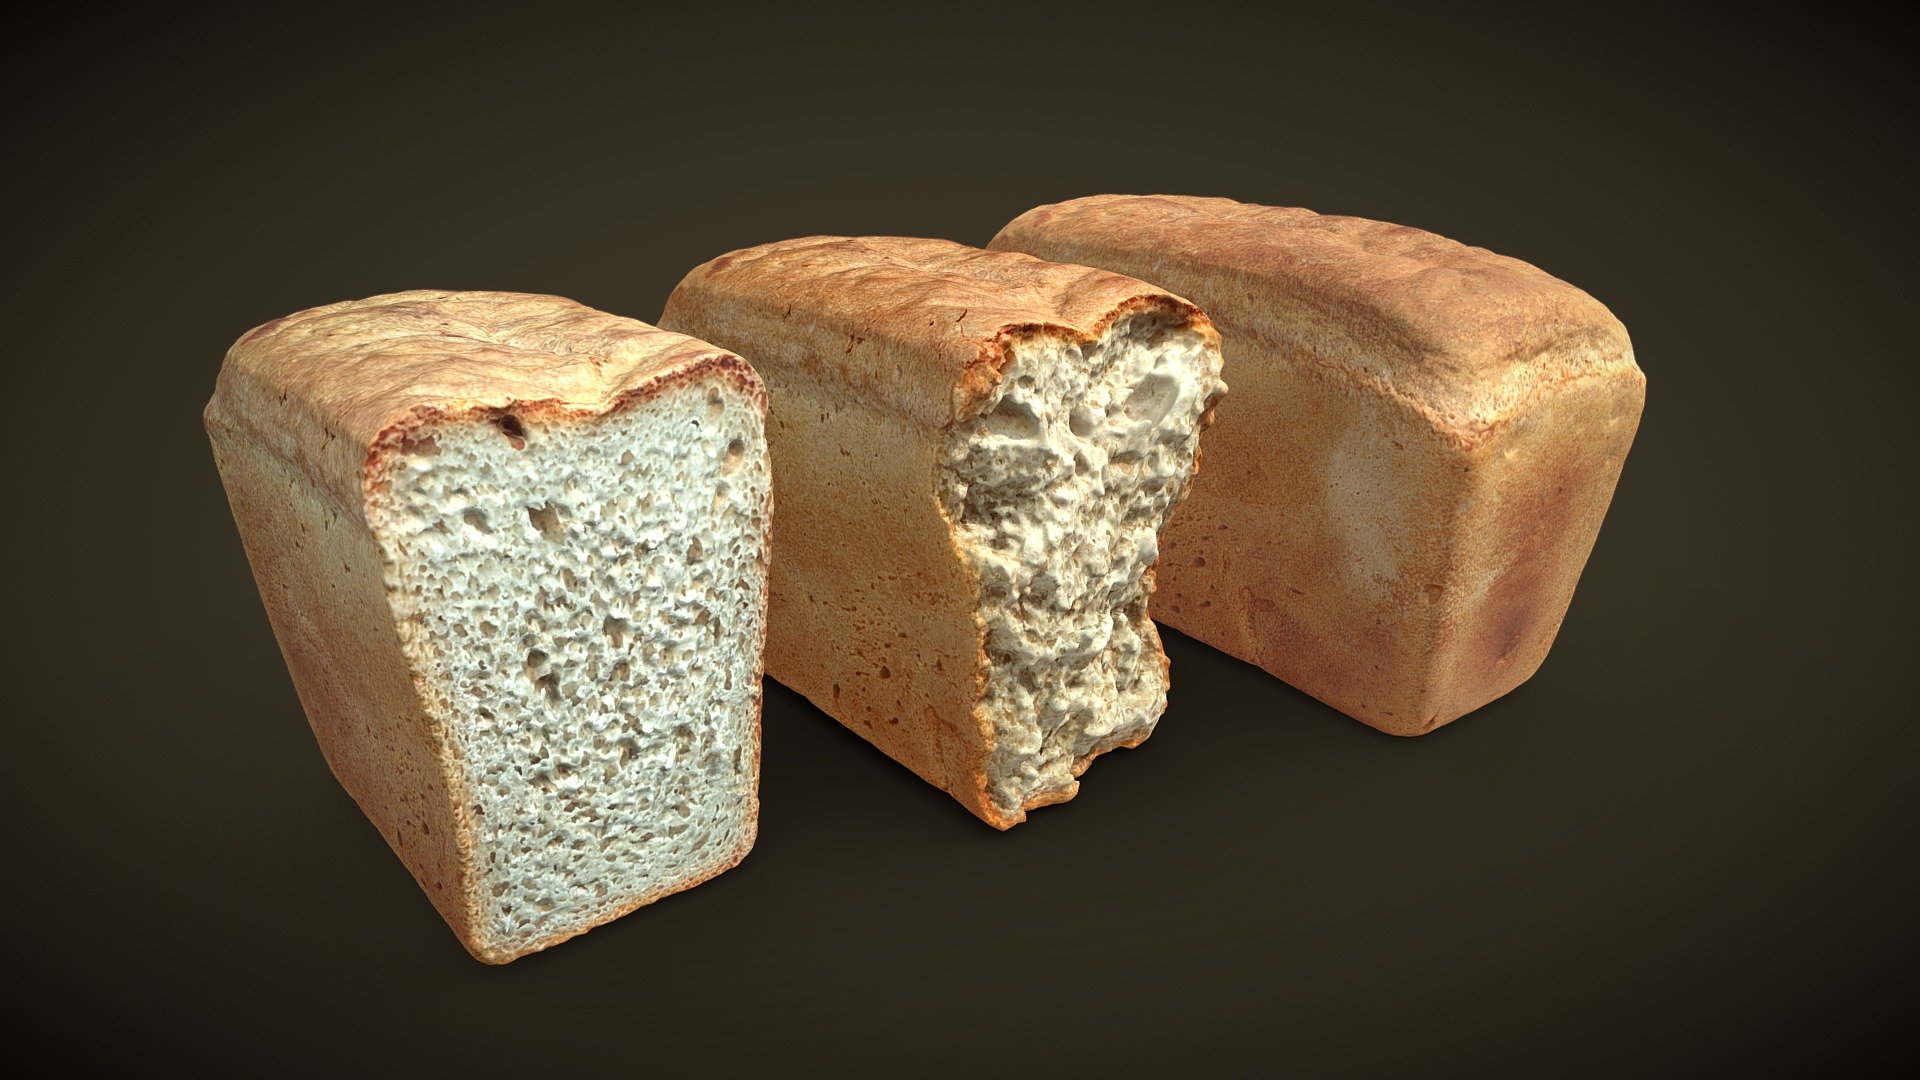 Scaned in KIRI Engine. 3x70 images

Clean scans with AI Masks.

Removed double vertices, aligned meshes, fixed saturation.

3 separate materials. Textures only diffuse [4096]

Scale 1:1
 - 🍞 Буханка | Brick Bread [Photogrammetry] - Download Free 3D model by hoxsvl 3d model